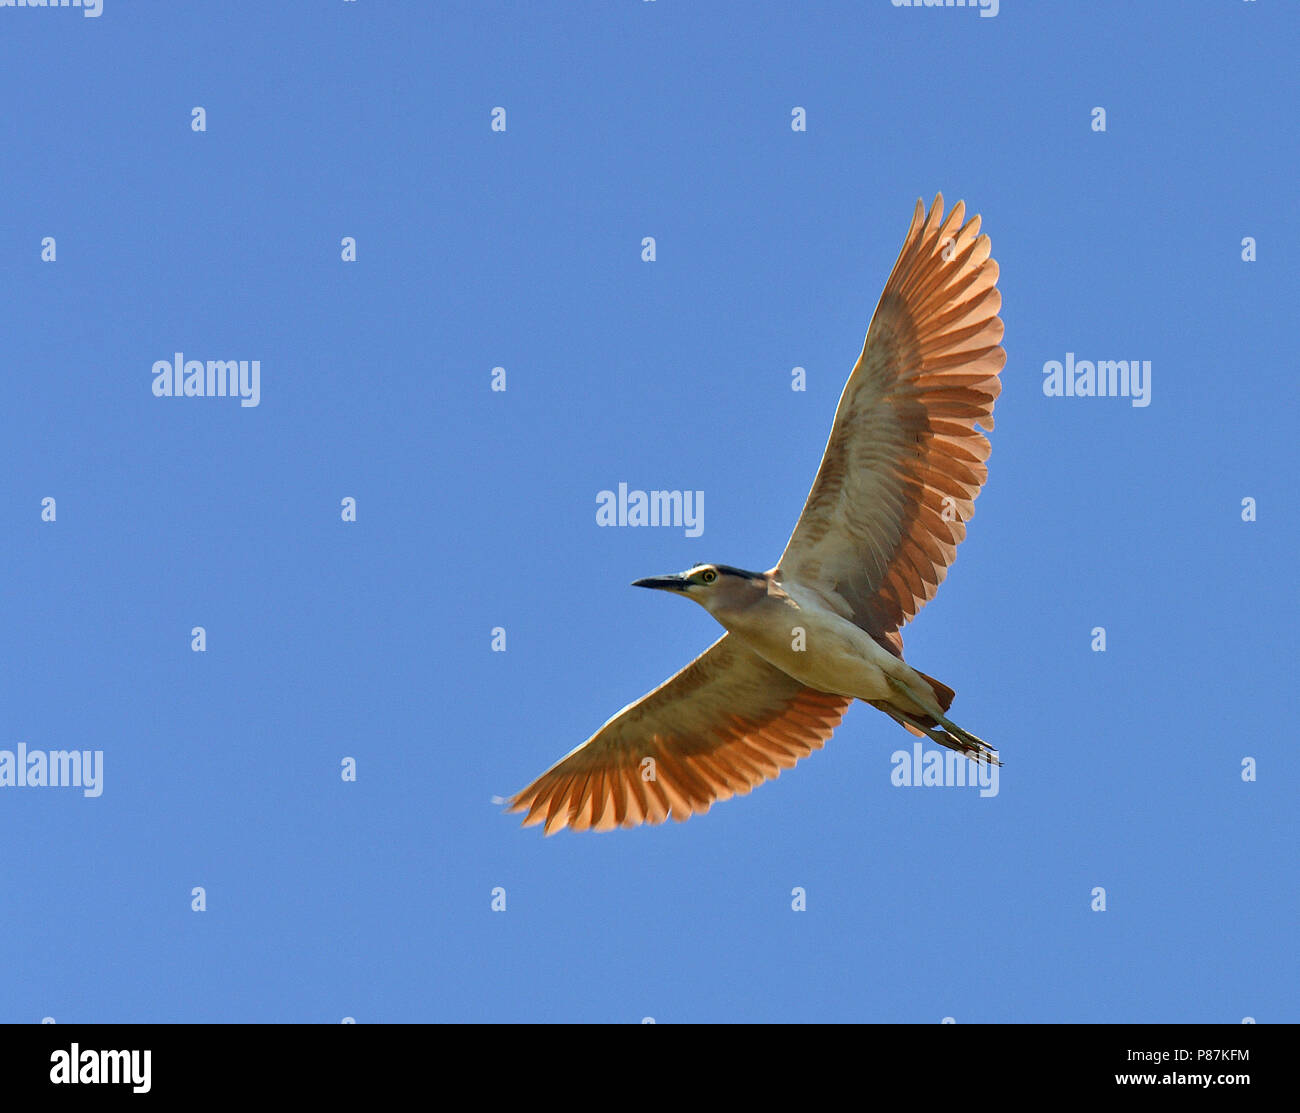 Rufous Night Heron (Nycticorax caledonicus hilli) in flight against a blue sky. Stock Photo